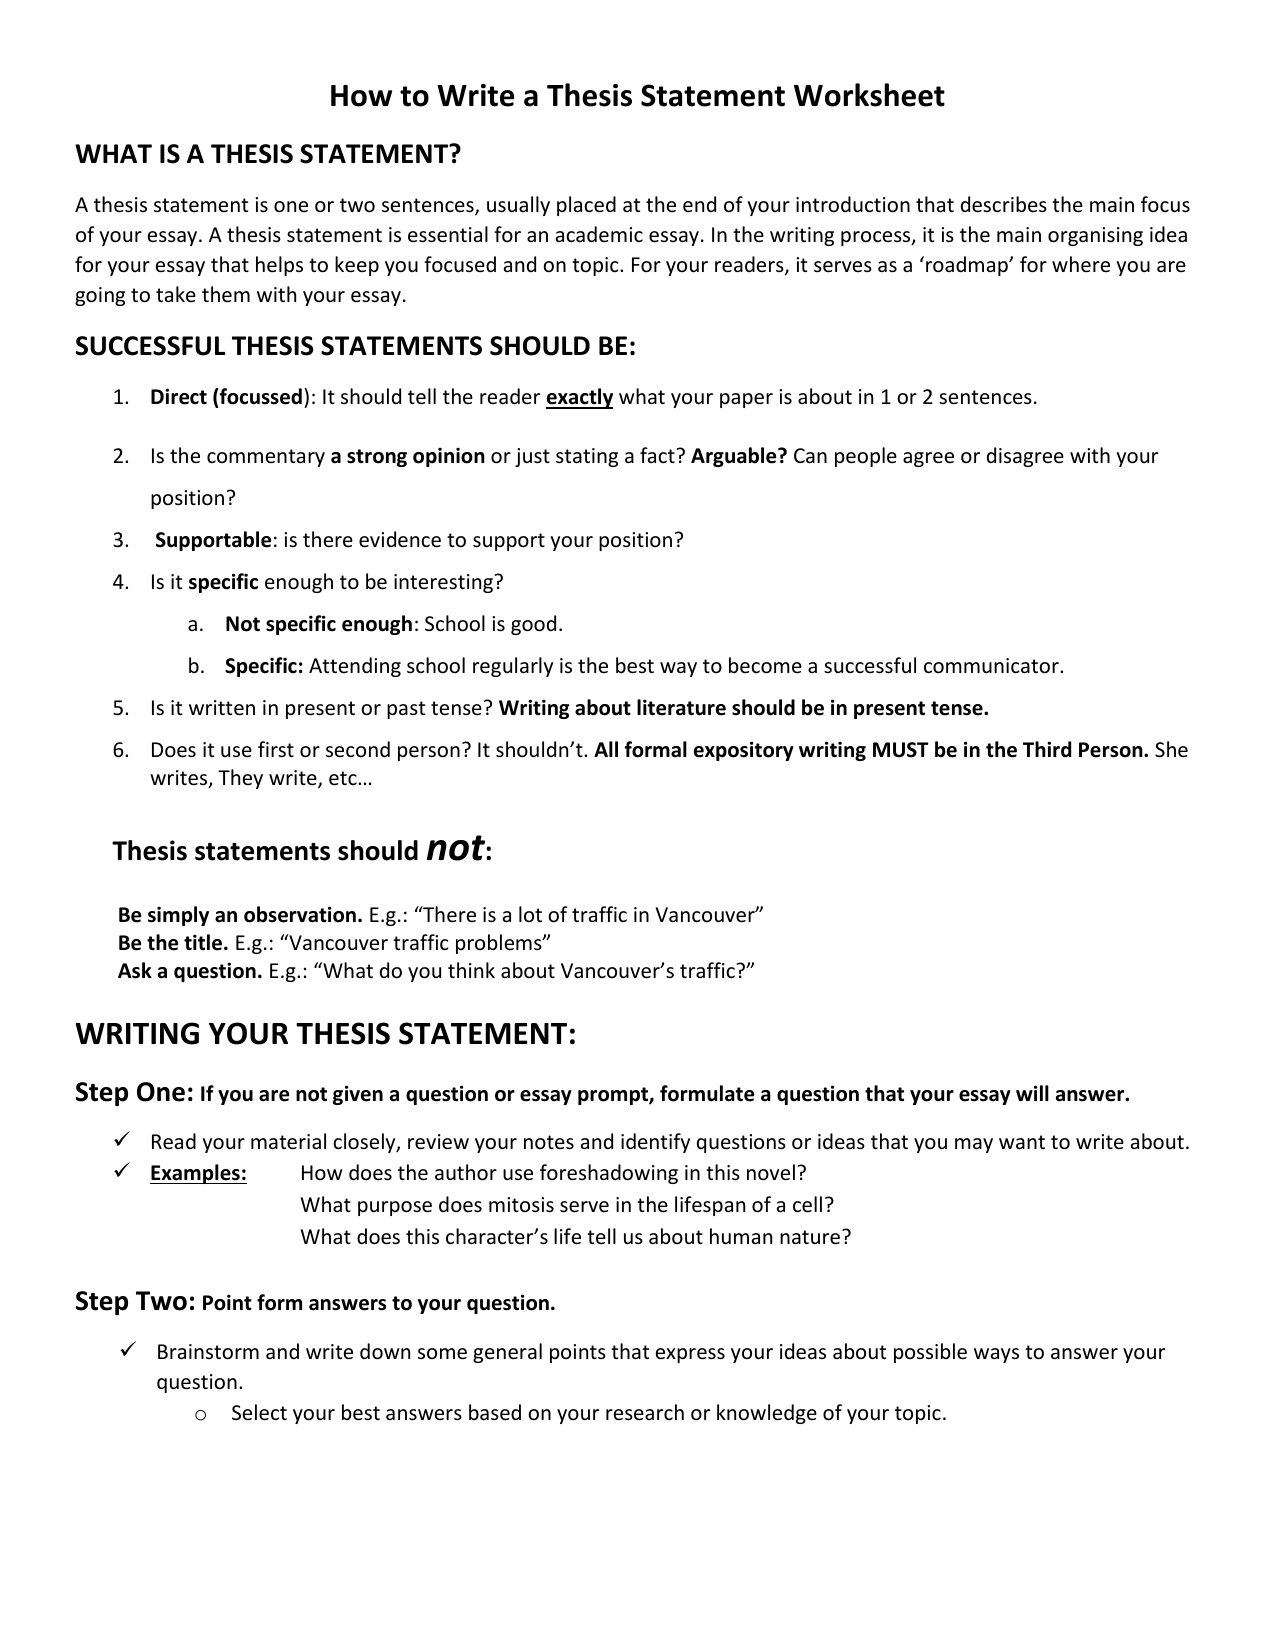 how to write a thesis statement worksheet Inside Identifying Thesis Statement Worksheet